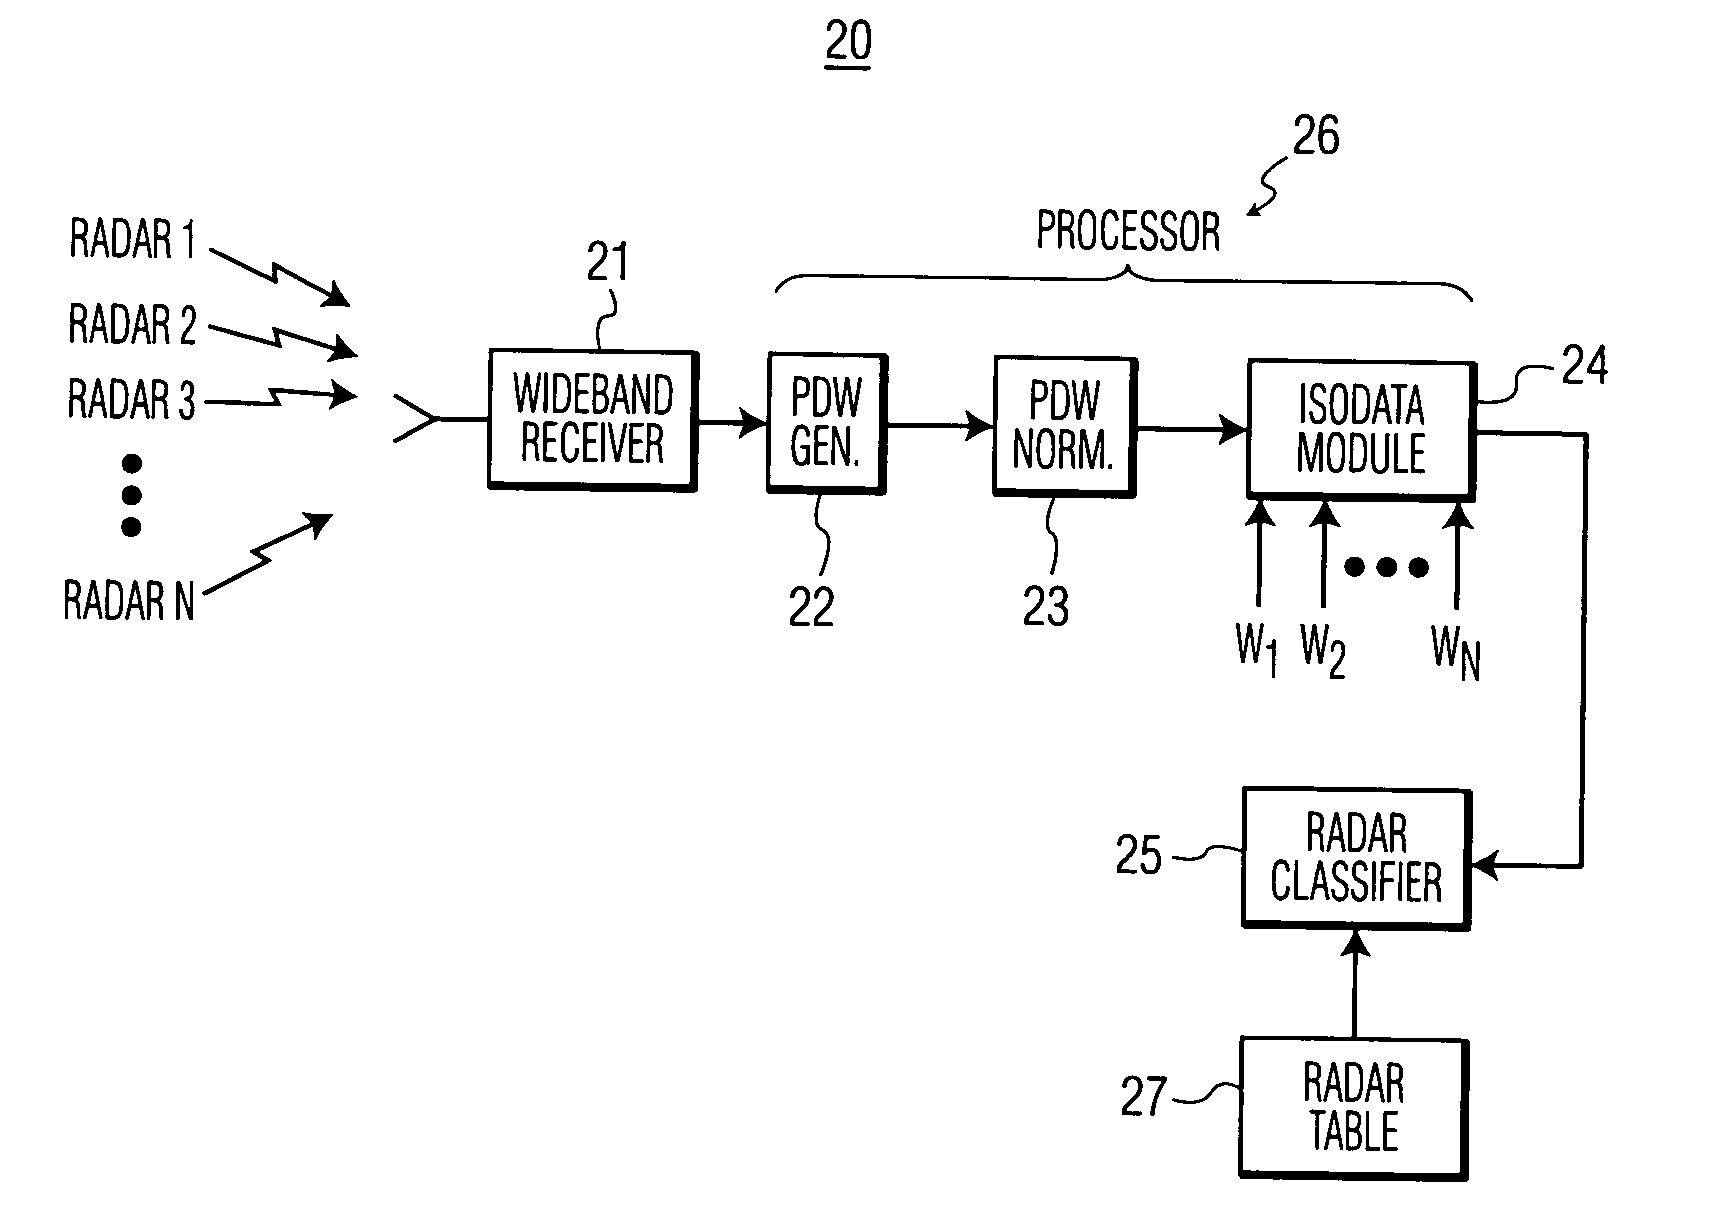 Method of radar pattern recognition by sorting signals into data clusters